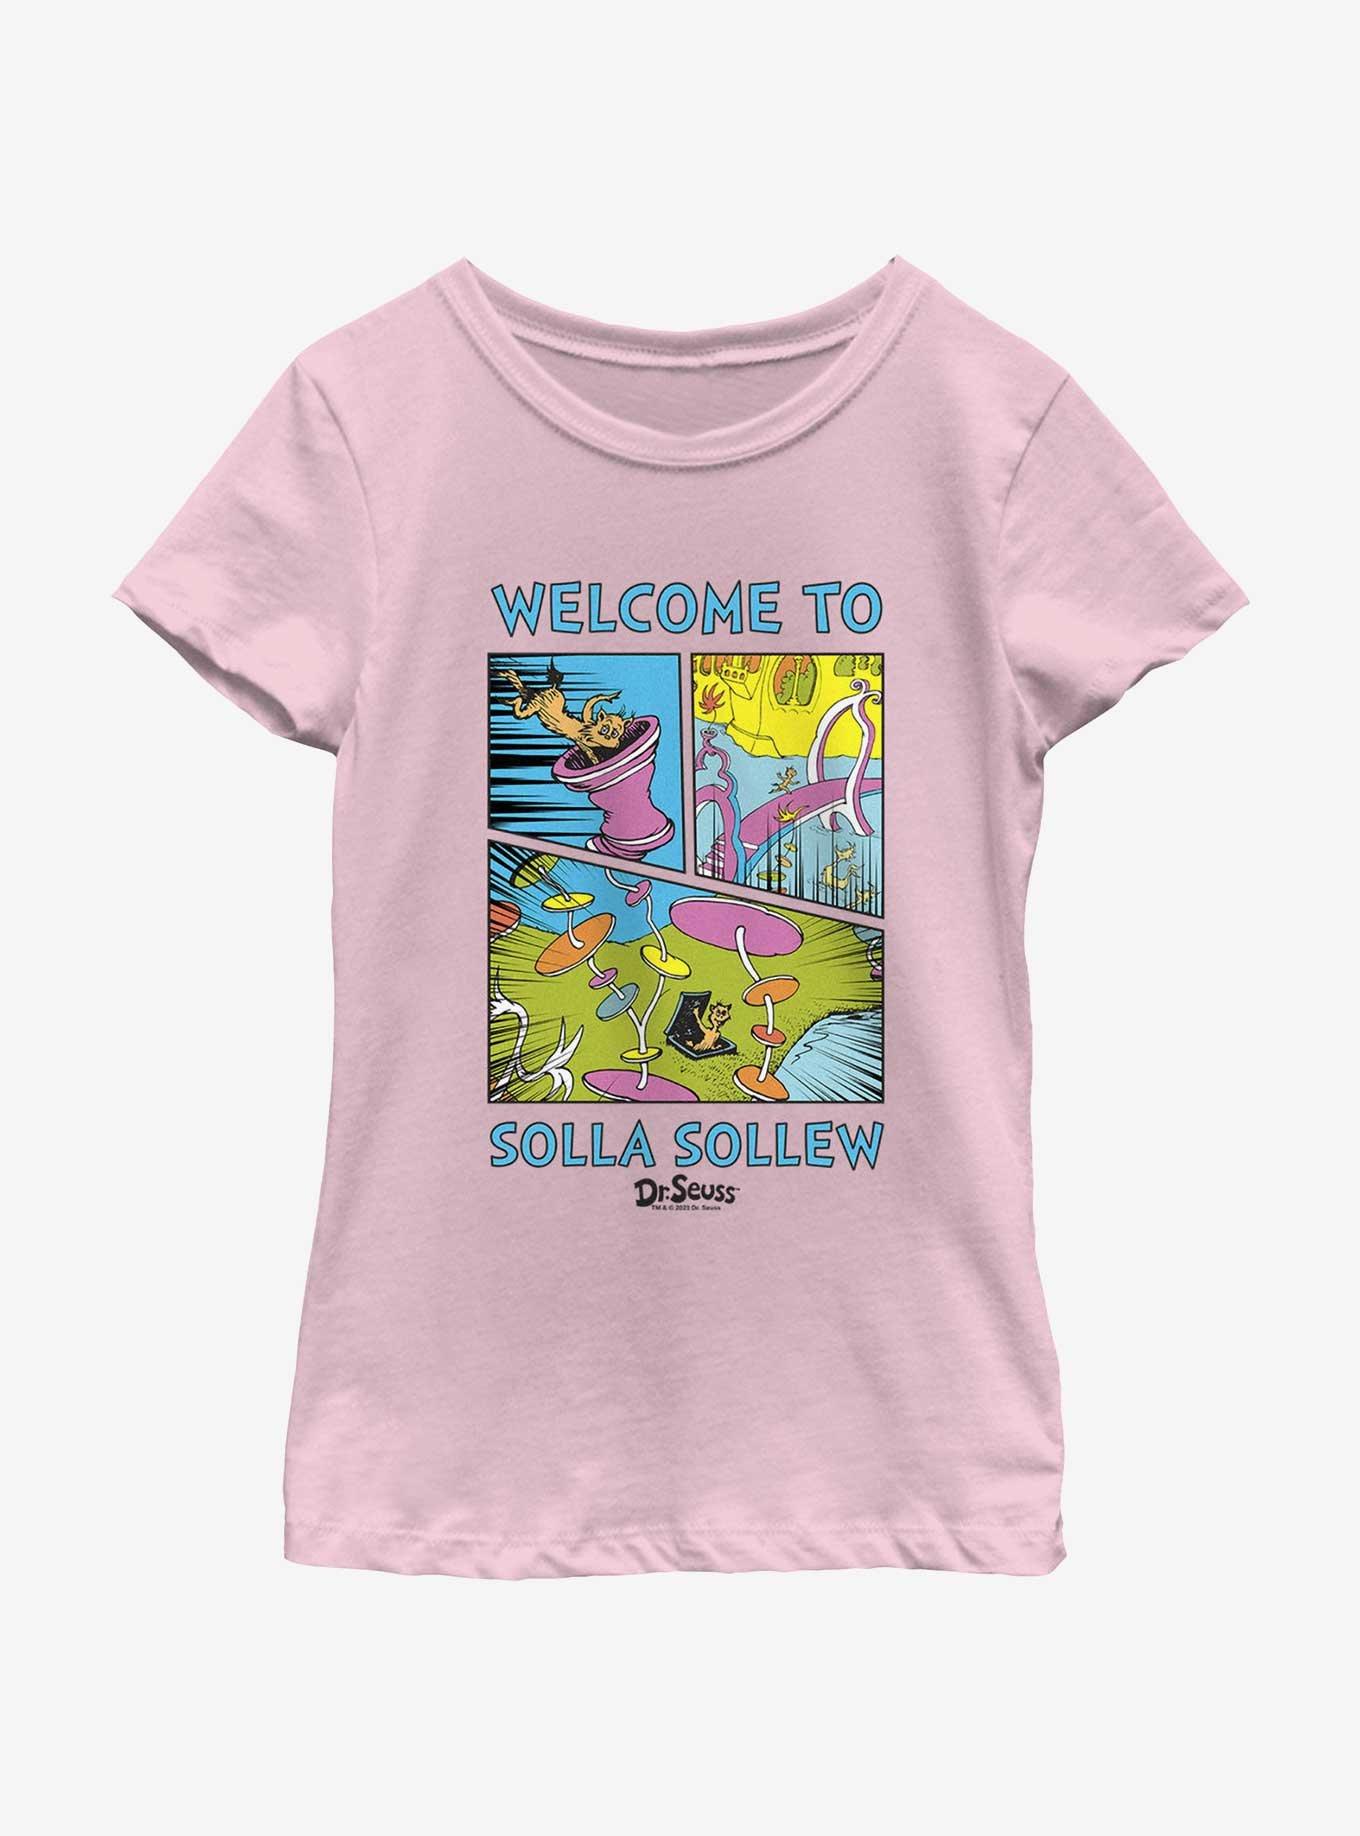 Dr. Seuss's I Had Trouble Getting Into Solla Sollew Welcome To Solla Sollew Youth Girls T-Shirt, PINK, hi-res